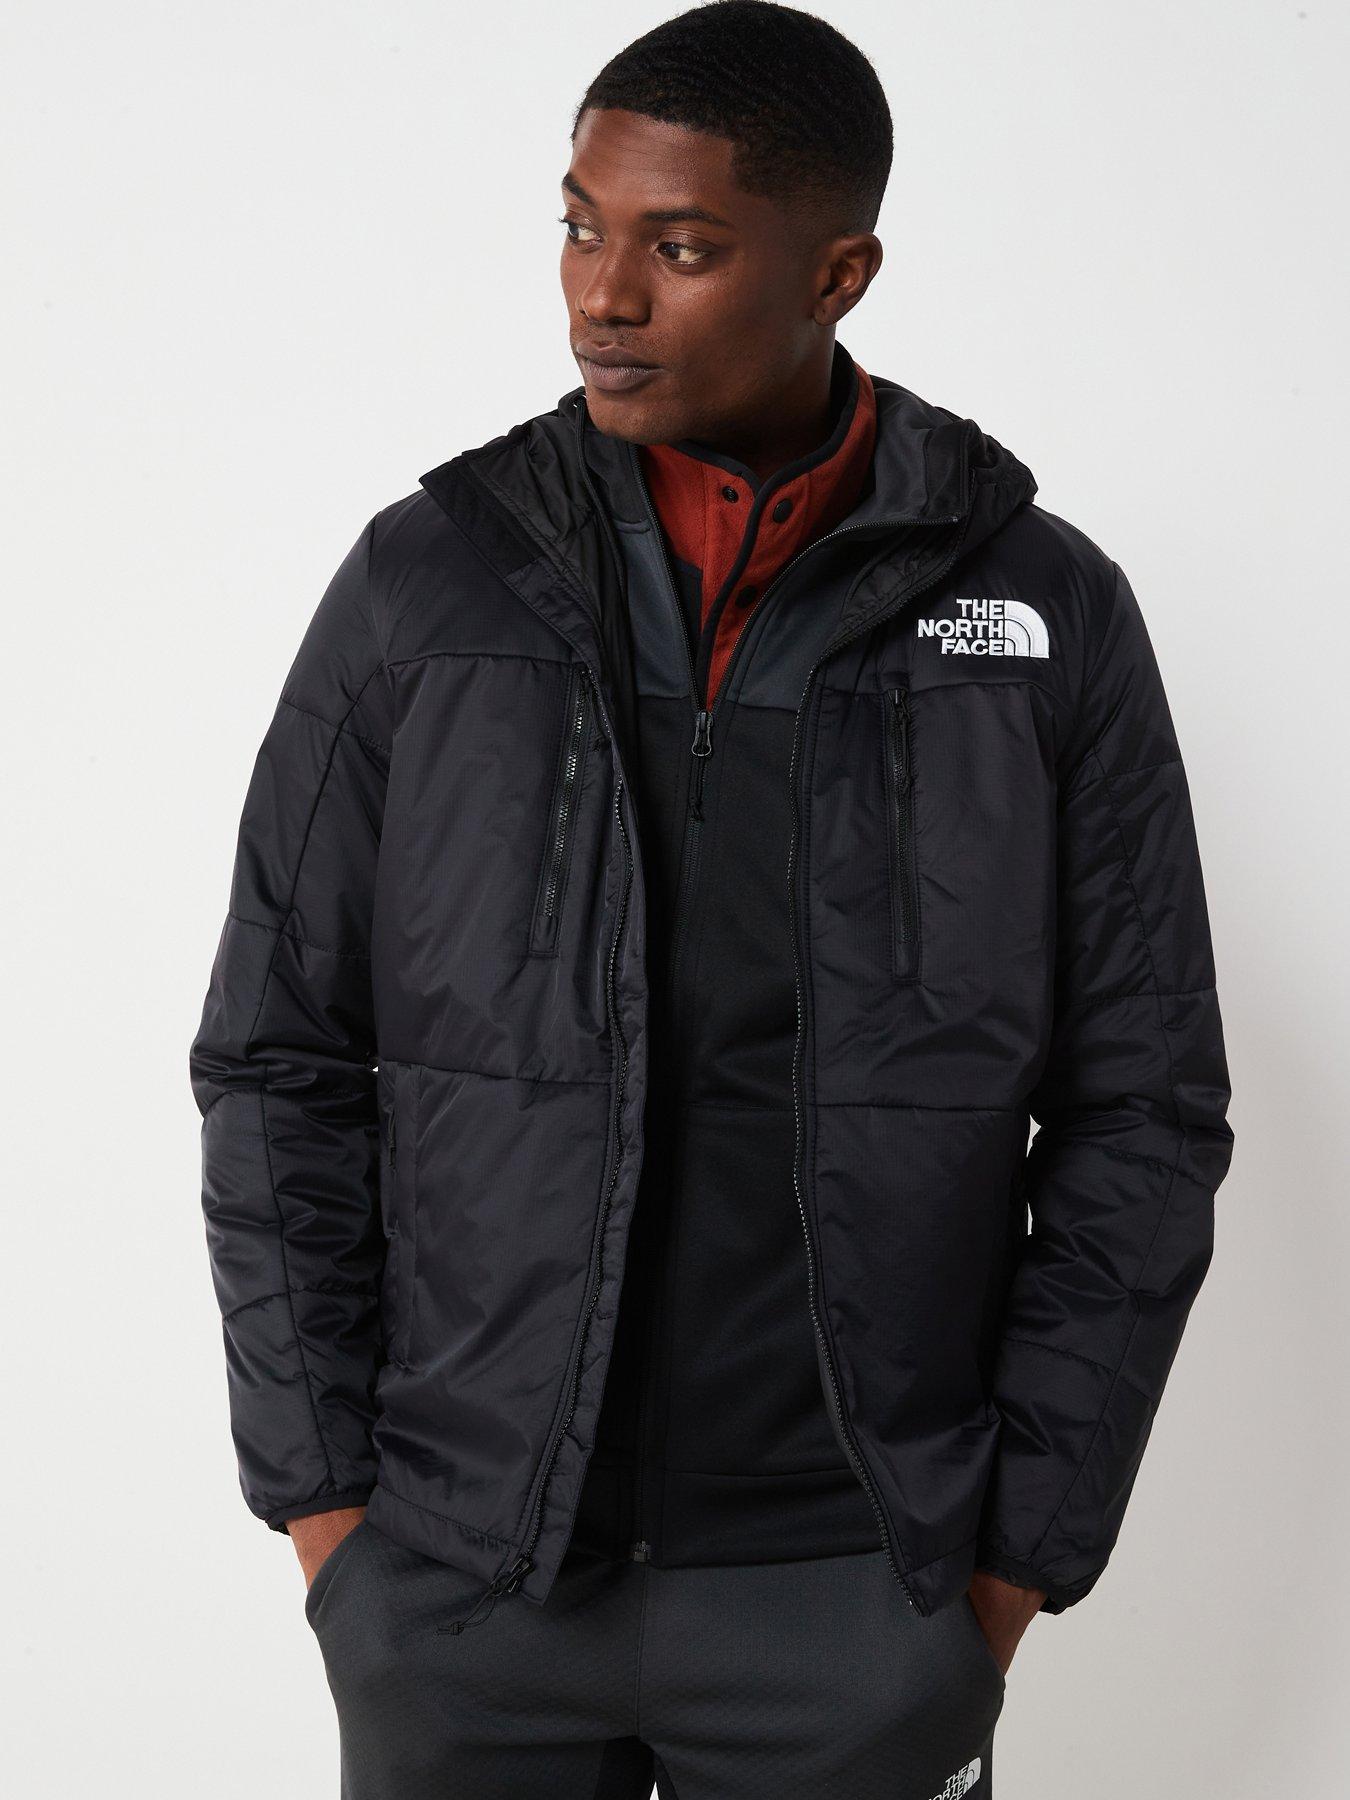 THE NORTH FACE Men's Himalayan Insulated Jacket - Brown